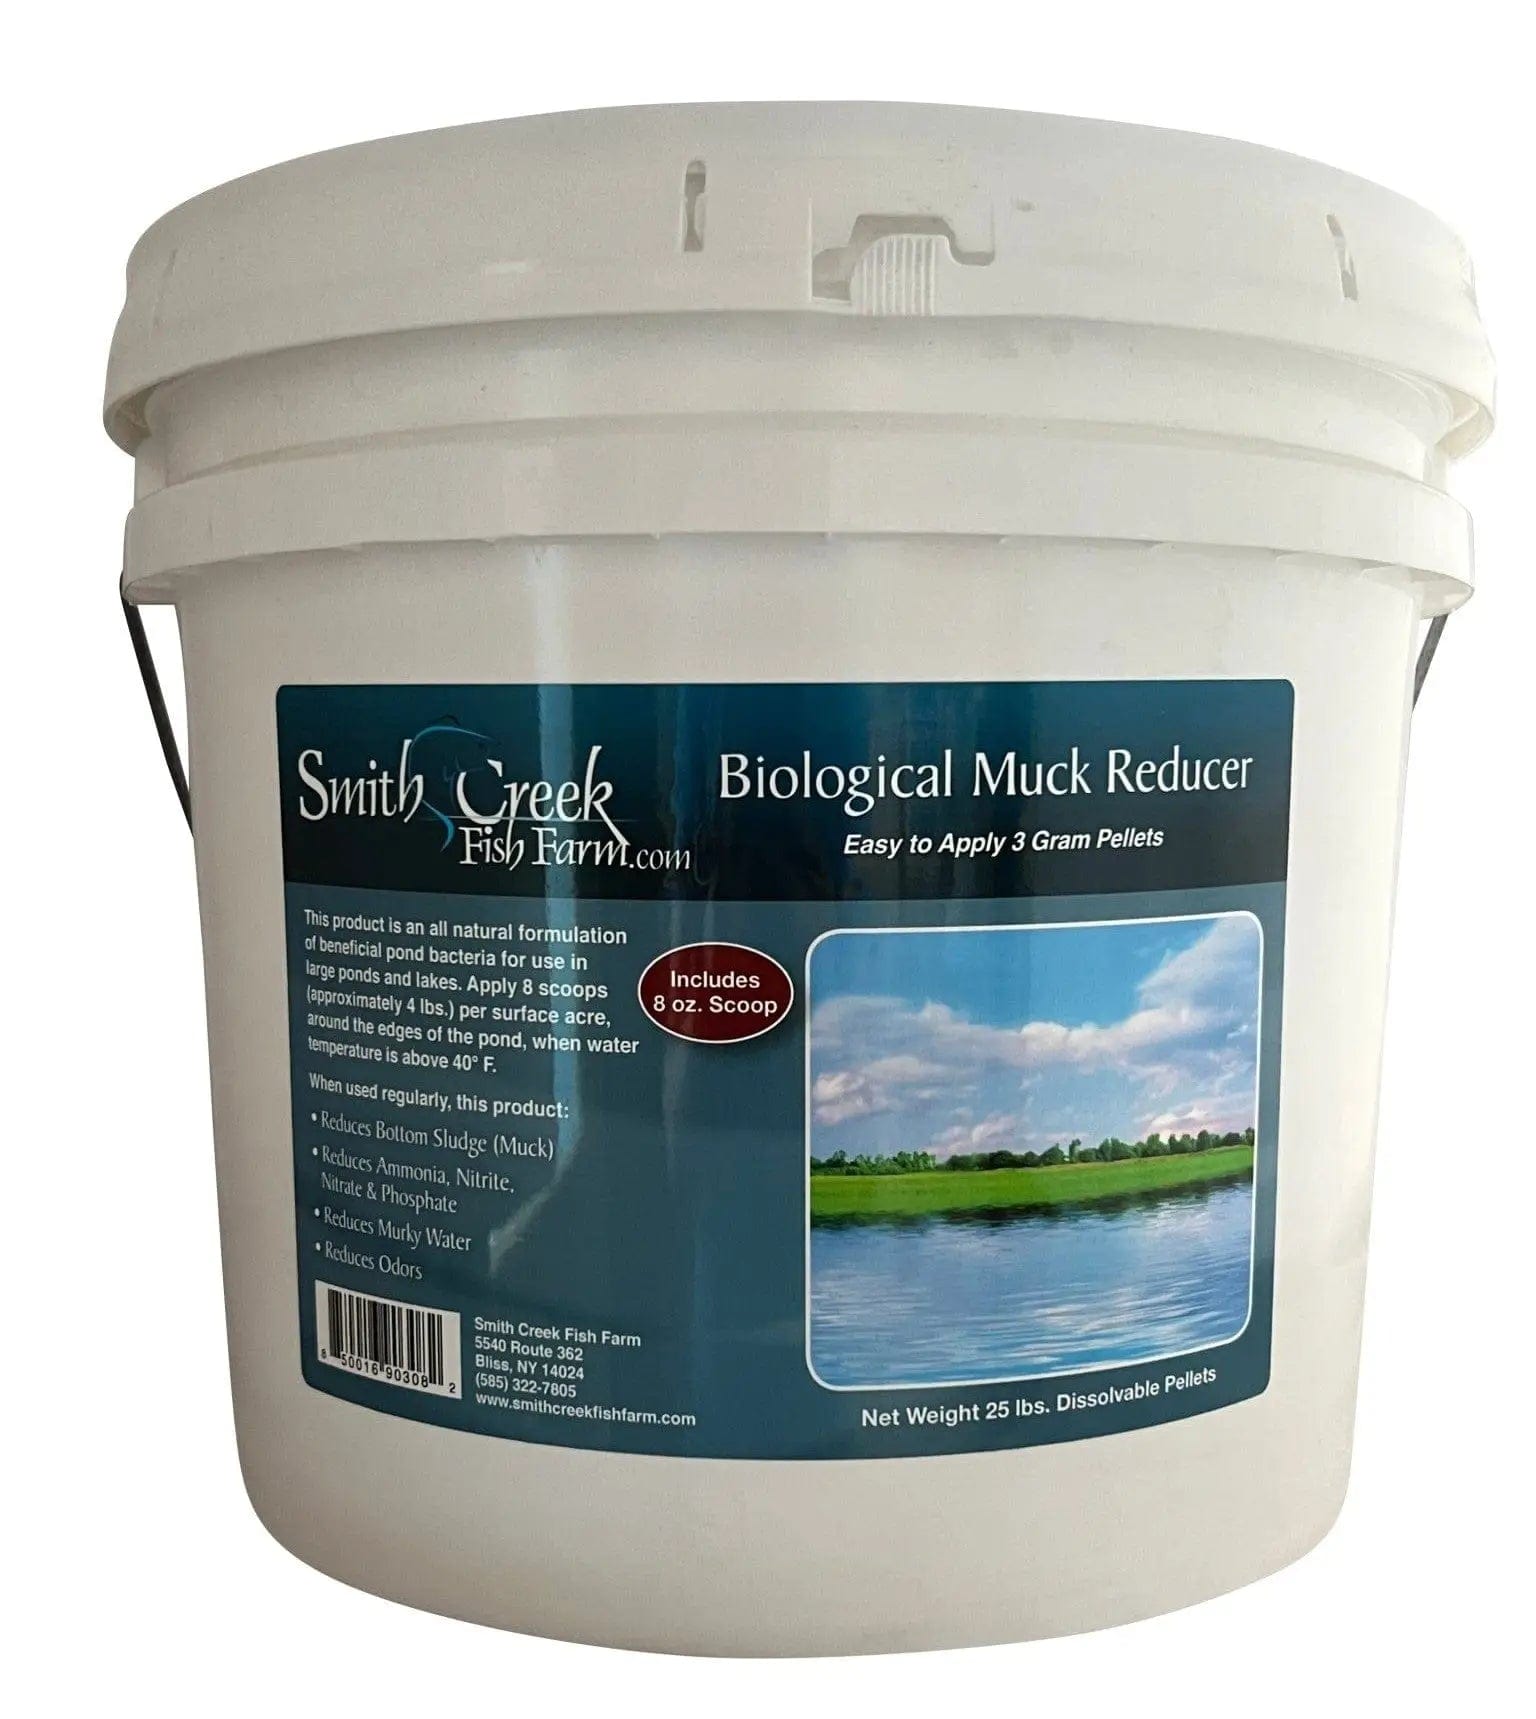 Smith Creek Lake & Pond Bacterial Biological Muck Reducer Pellets Pond Muck Reducer/Remover Pellets for Sale | Smith Creek Fish Farm